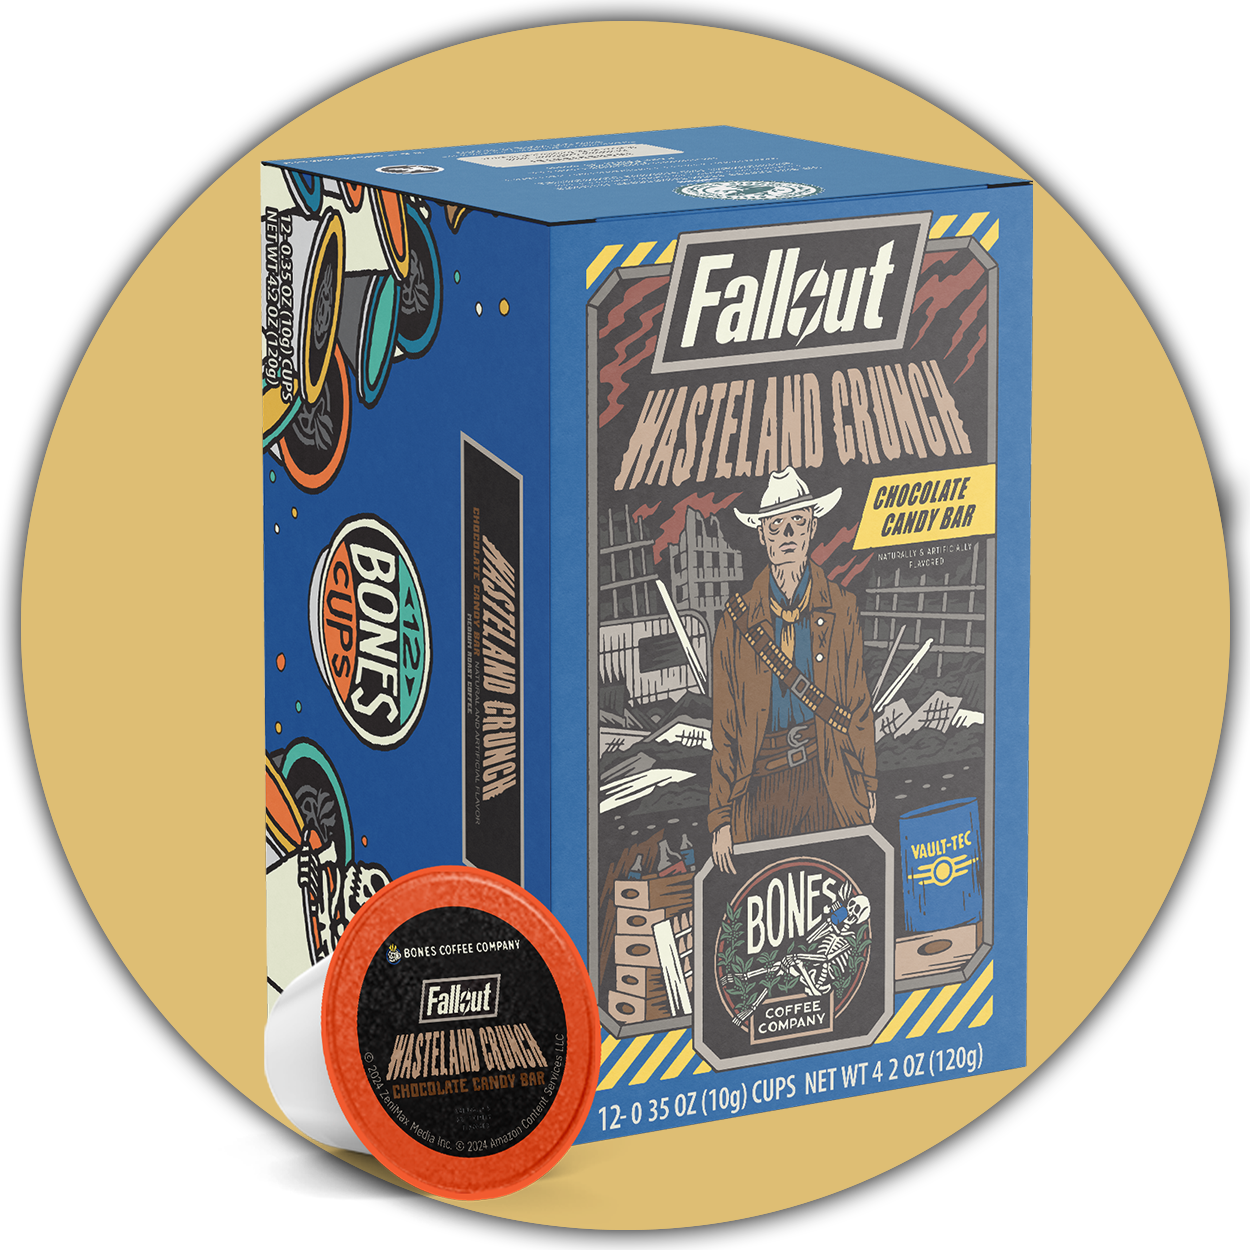 A box of Bones Cups flavored coffee inspired by Fallout named Wasteland Crunch. Its flavor is chocolate candy bar. On the art is The Ghoul from the Fallout show, and there is a stylized head of The Ghoul near it alongside a chocolate candy bar. A light brown circle is behind it.